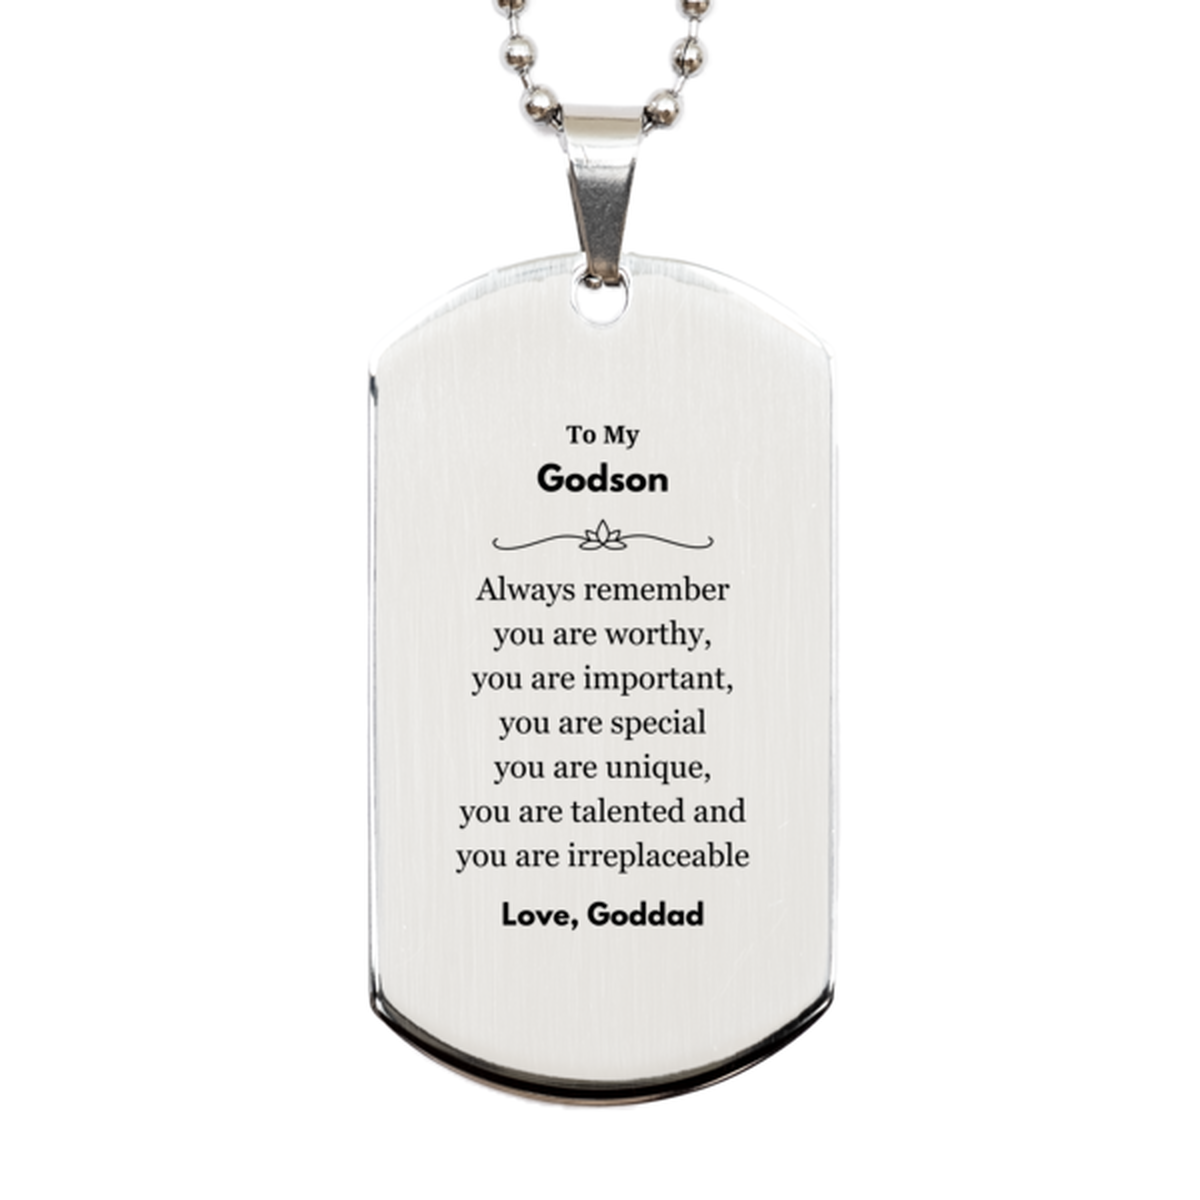 Godson Birthday Gifts from Goddad, Inspirational Silver Dog Tag for Godson Christmas Graduation Gifts for Godson Always remember you are worthy, you are important. Love, Goddad